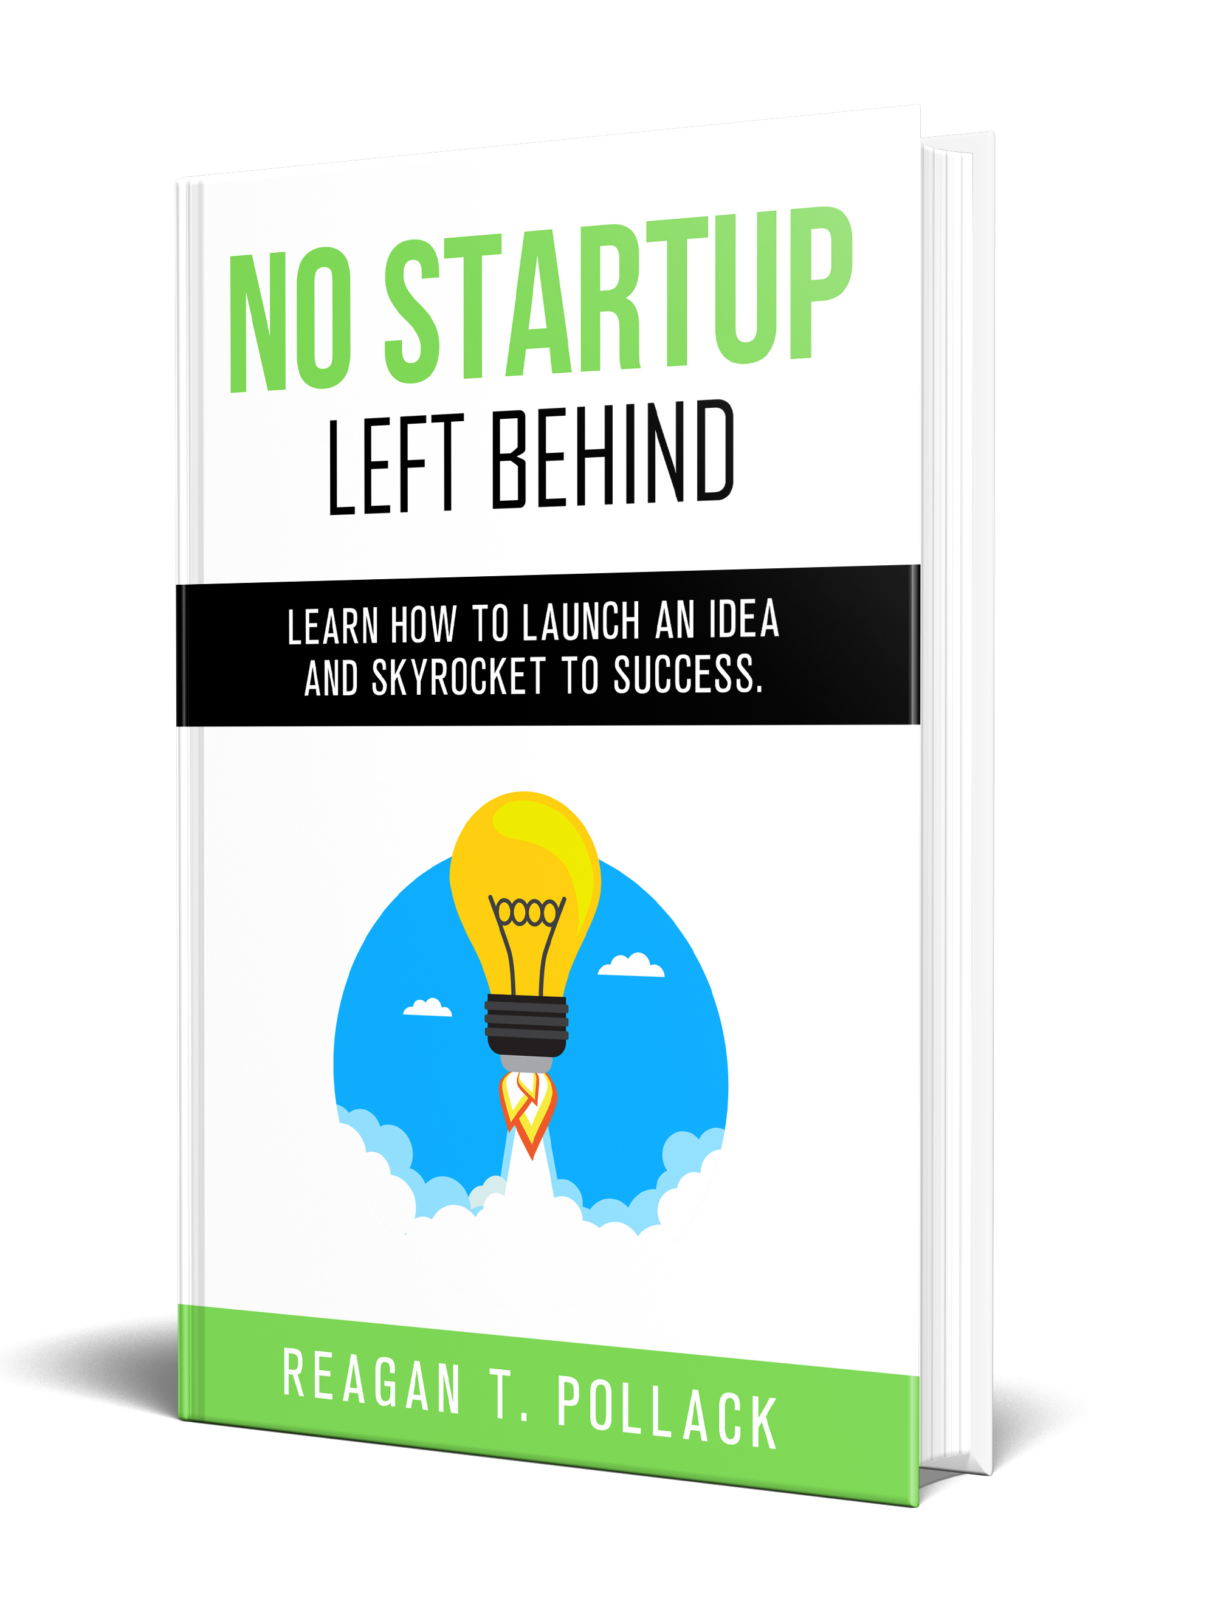 No Startup Left Behind - Learn How to Launch an Idea and Skyrocket to Startup Success - Reagan T. Pollack